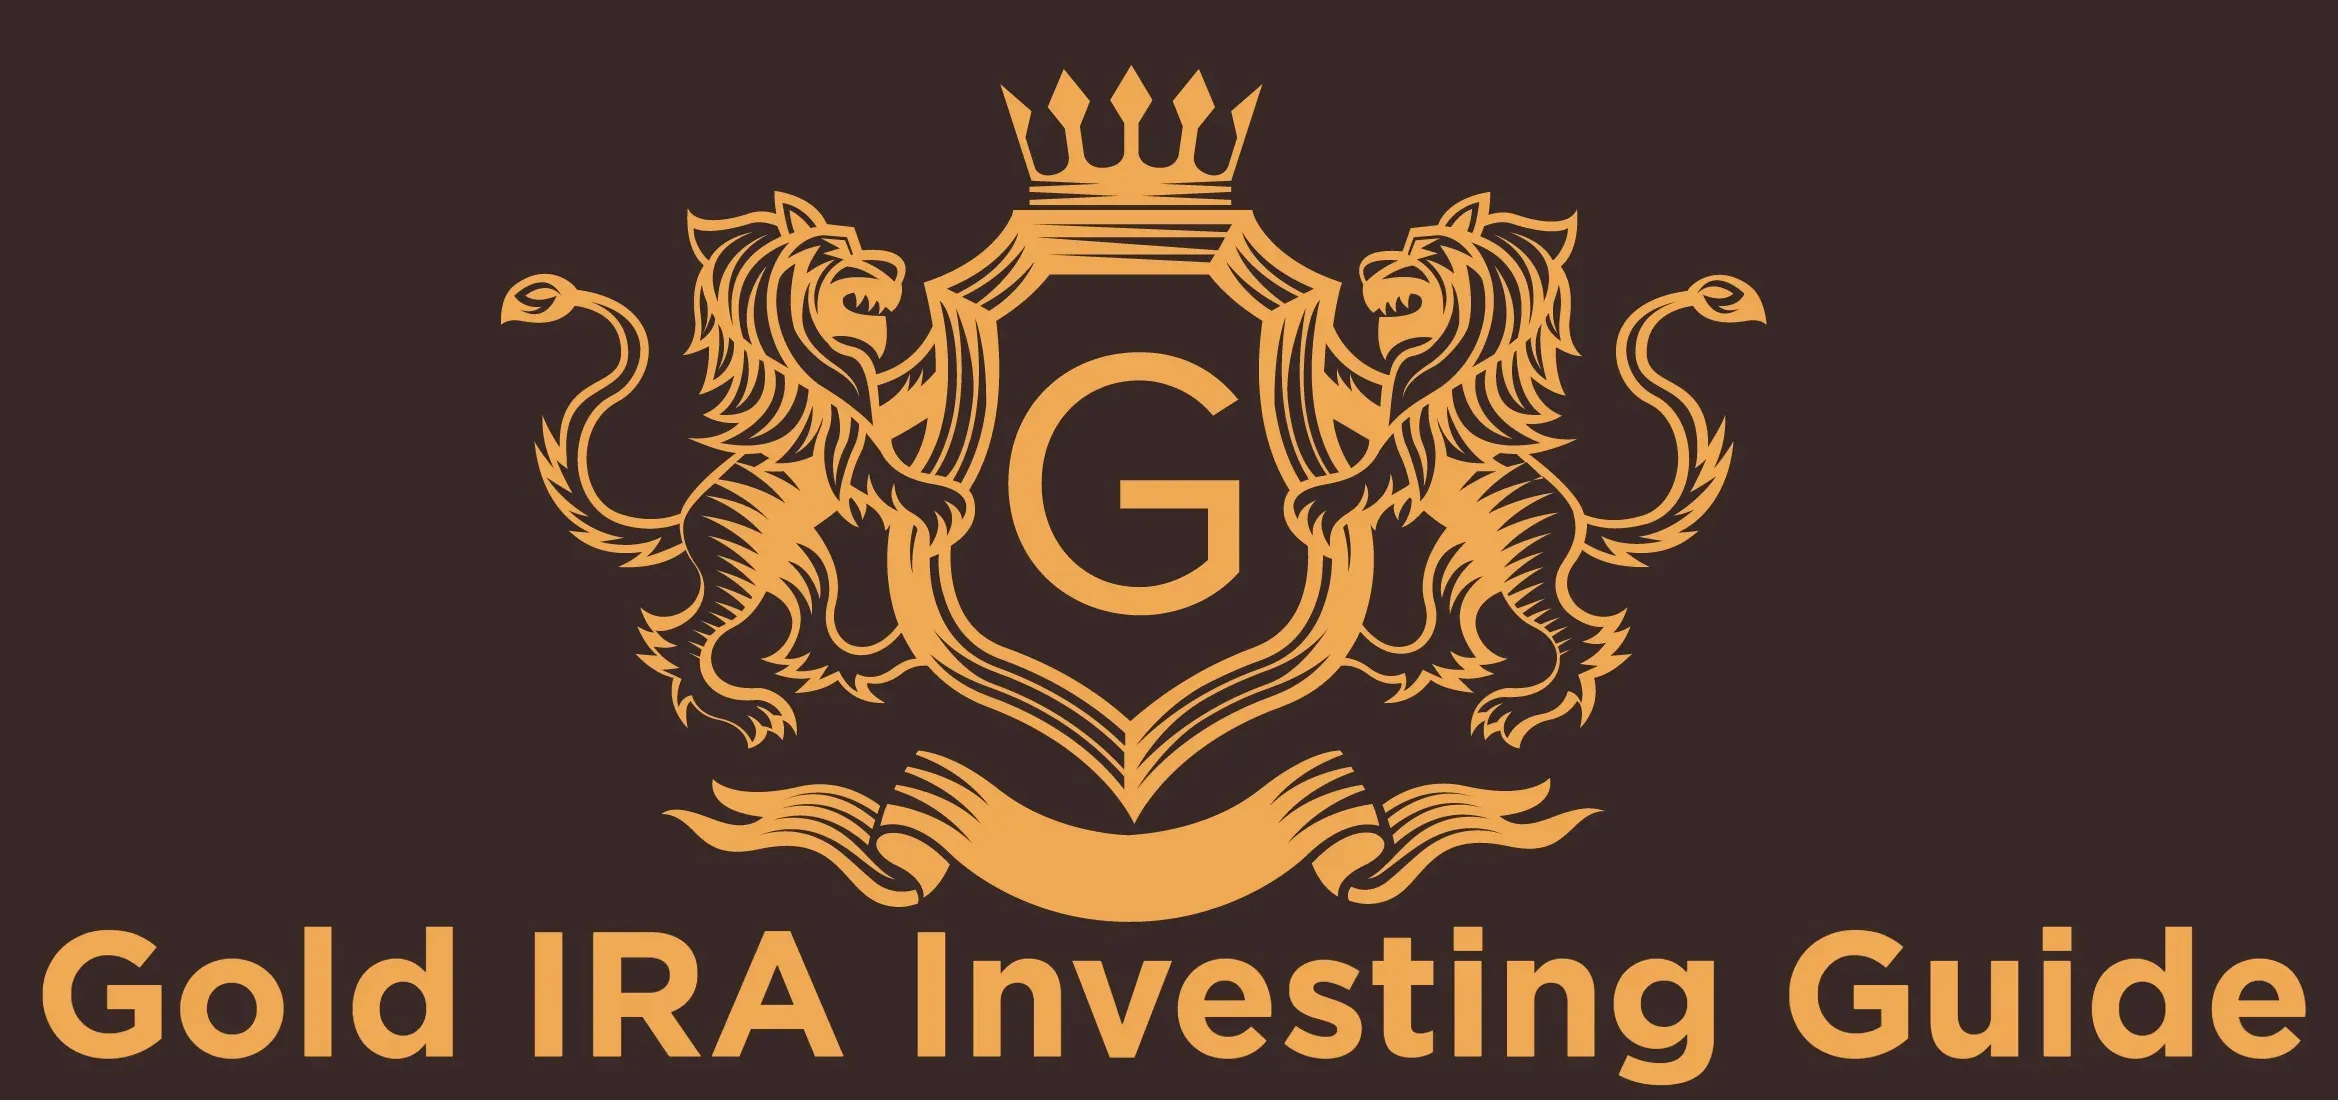 Gold Investing Guide Logo